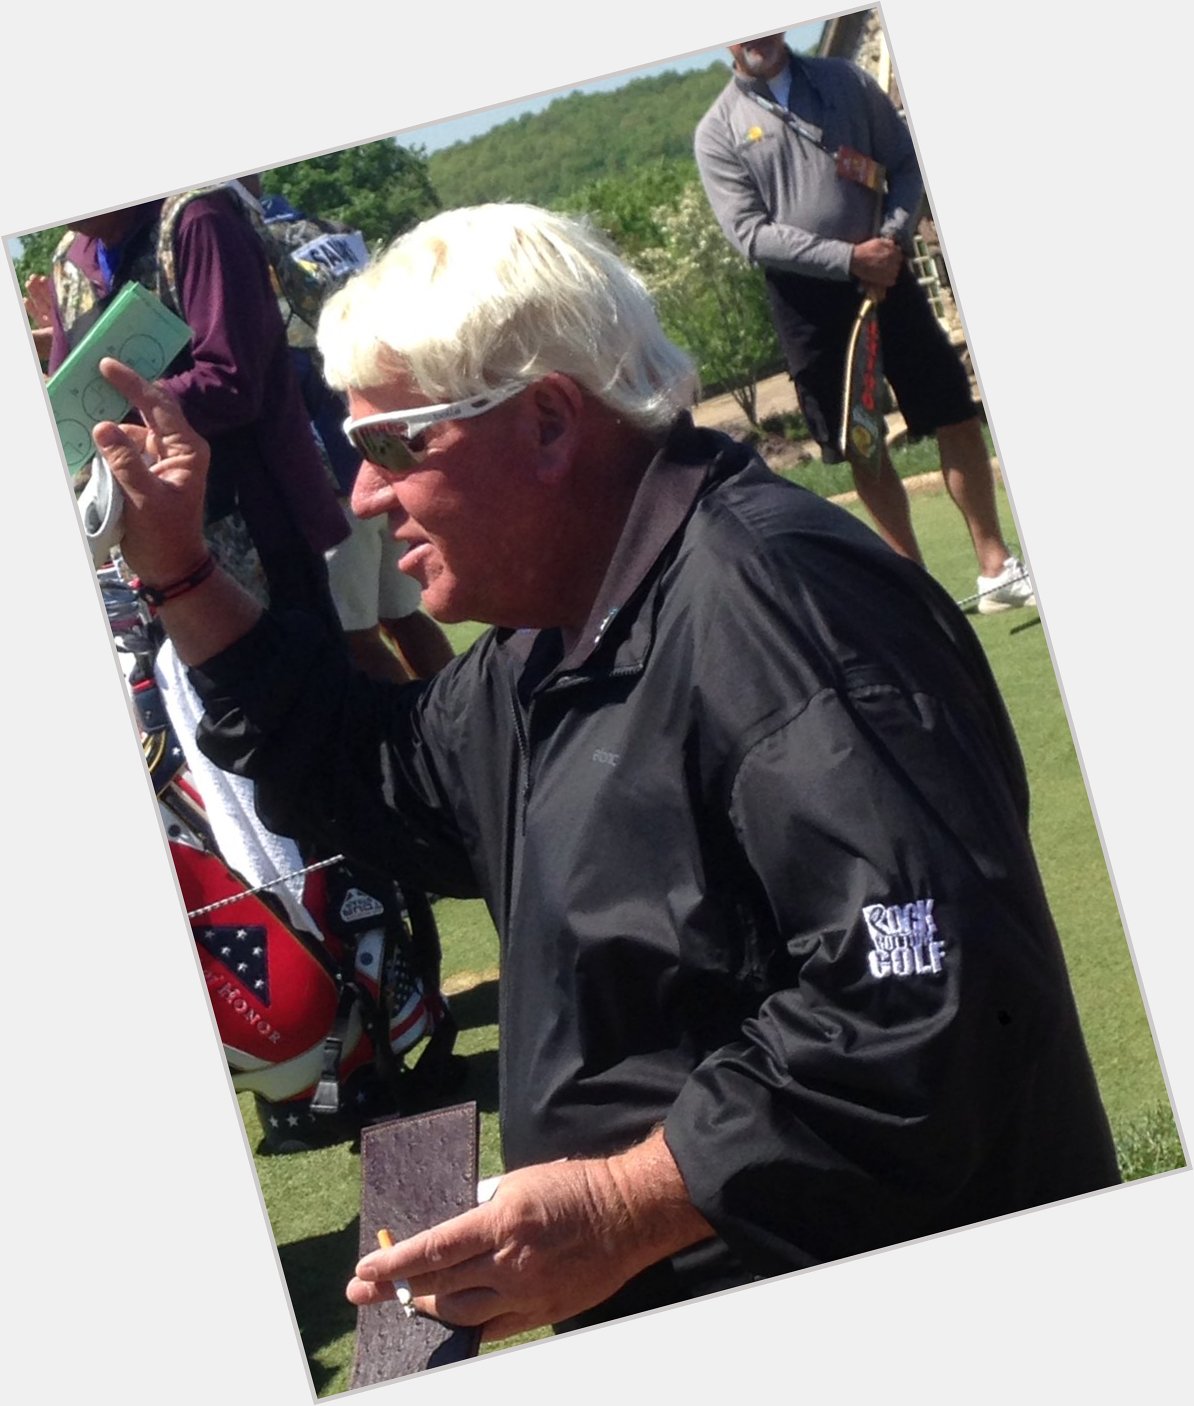 Happy Birthday to John Daly he teed off Legends of Golf 5 strokes off the lead 